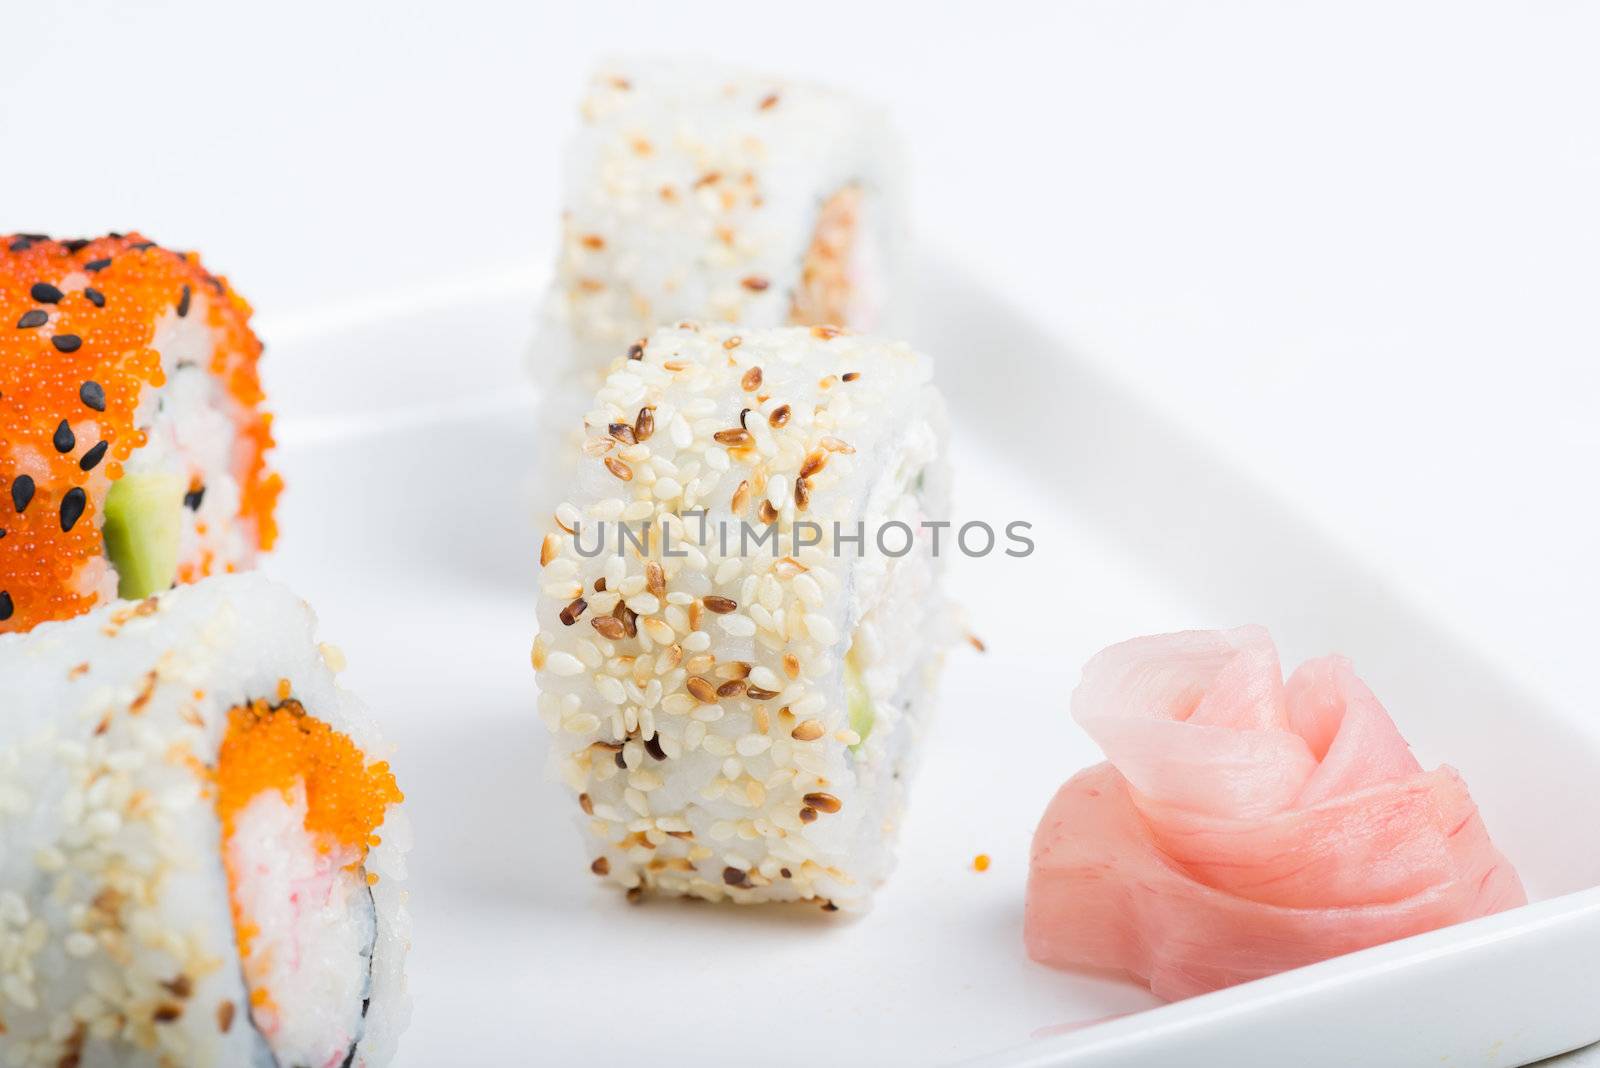 Sushi set with ginger rose on the plate